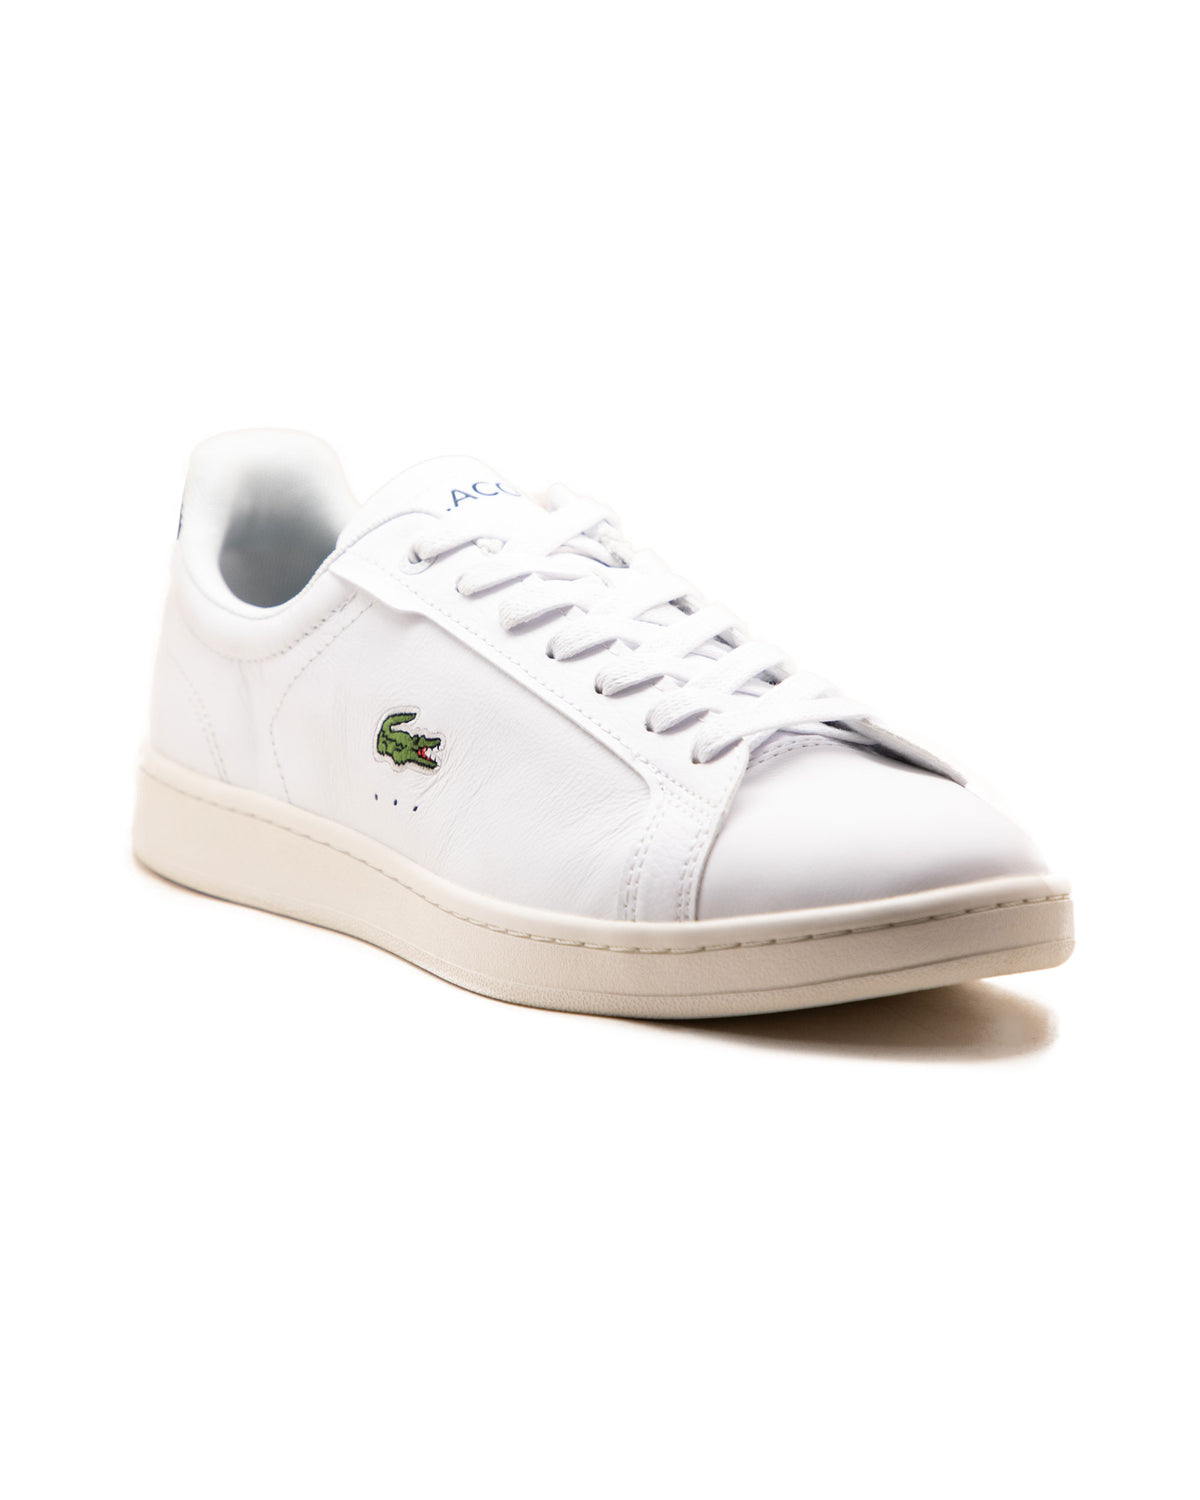 Lacoste Carnaby Pro 123 9 White Green